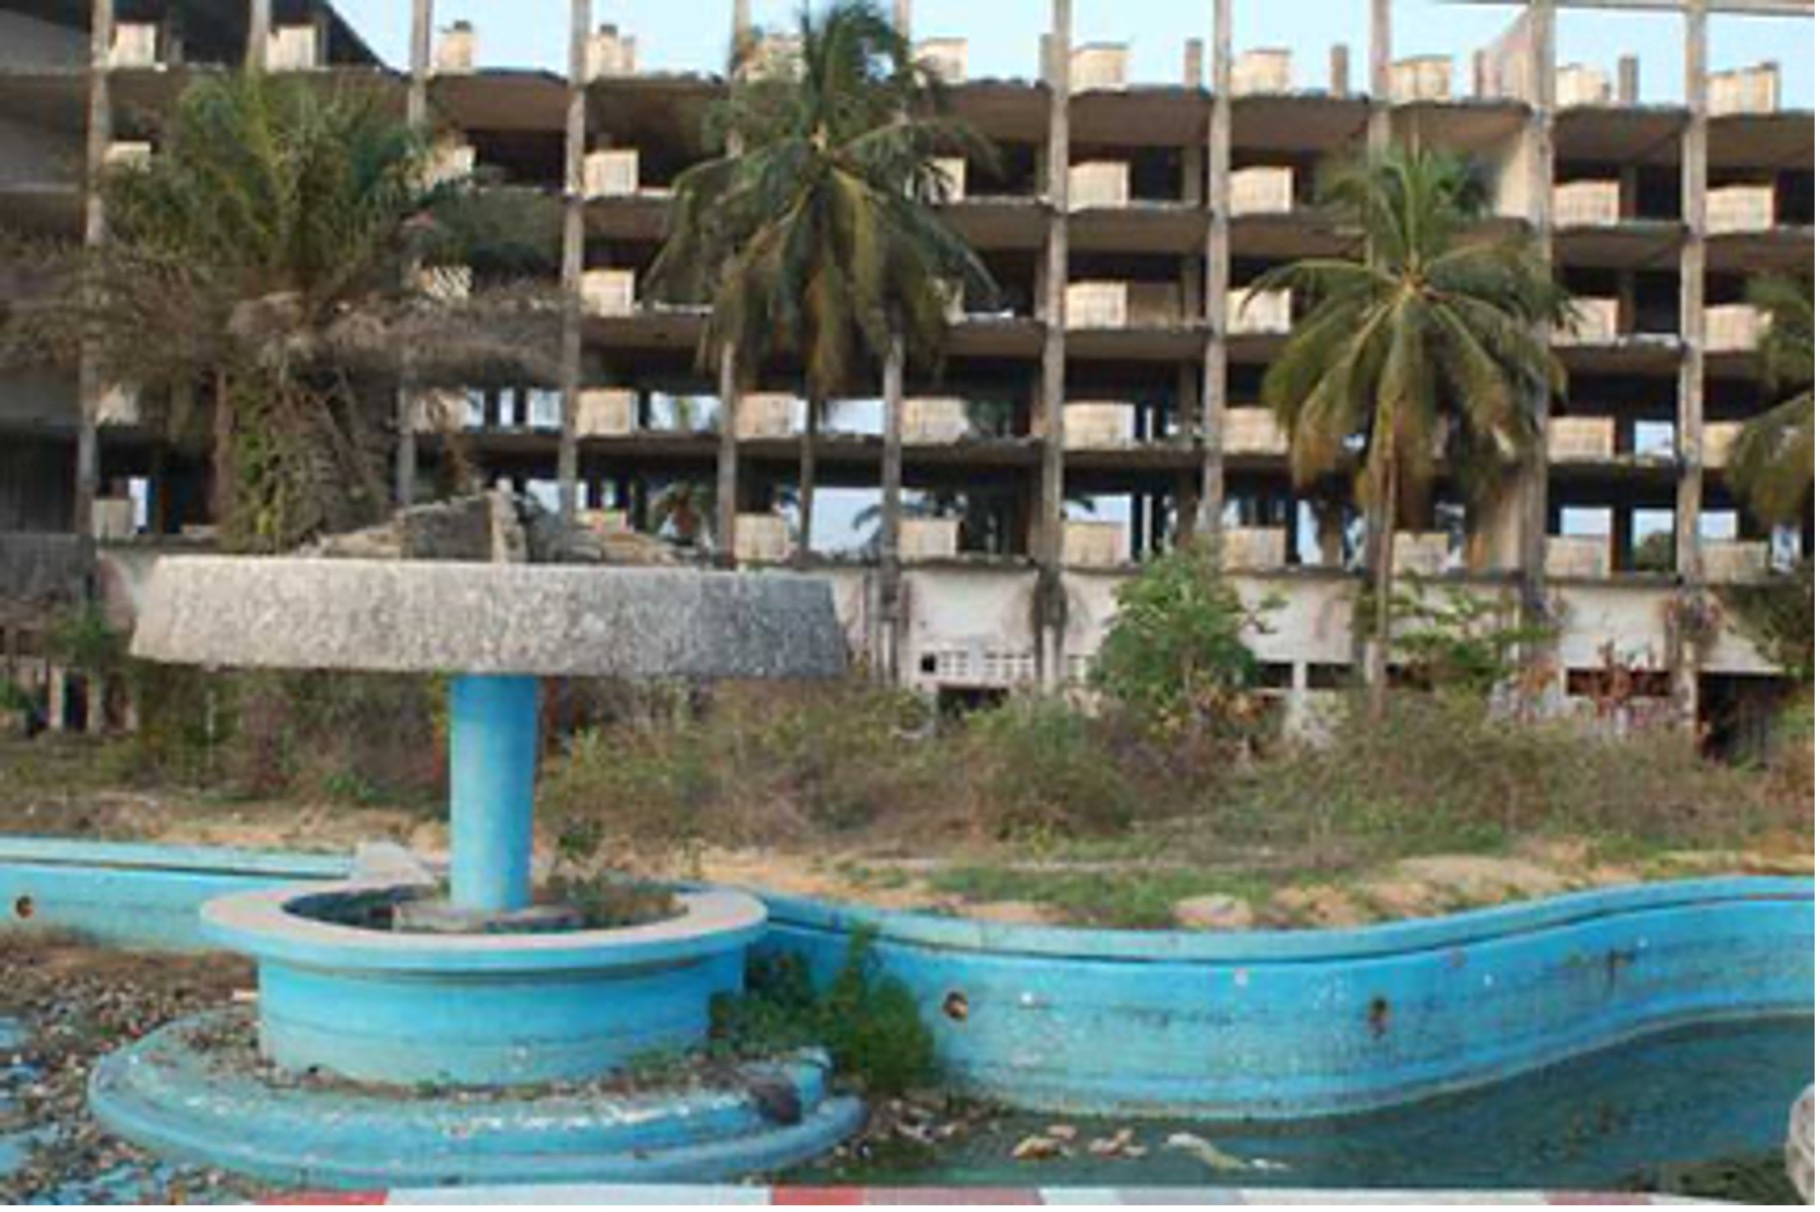 An abandoned pool at Hotel Africa in Monrovia, Liberia.